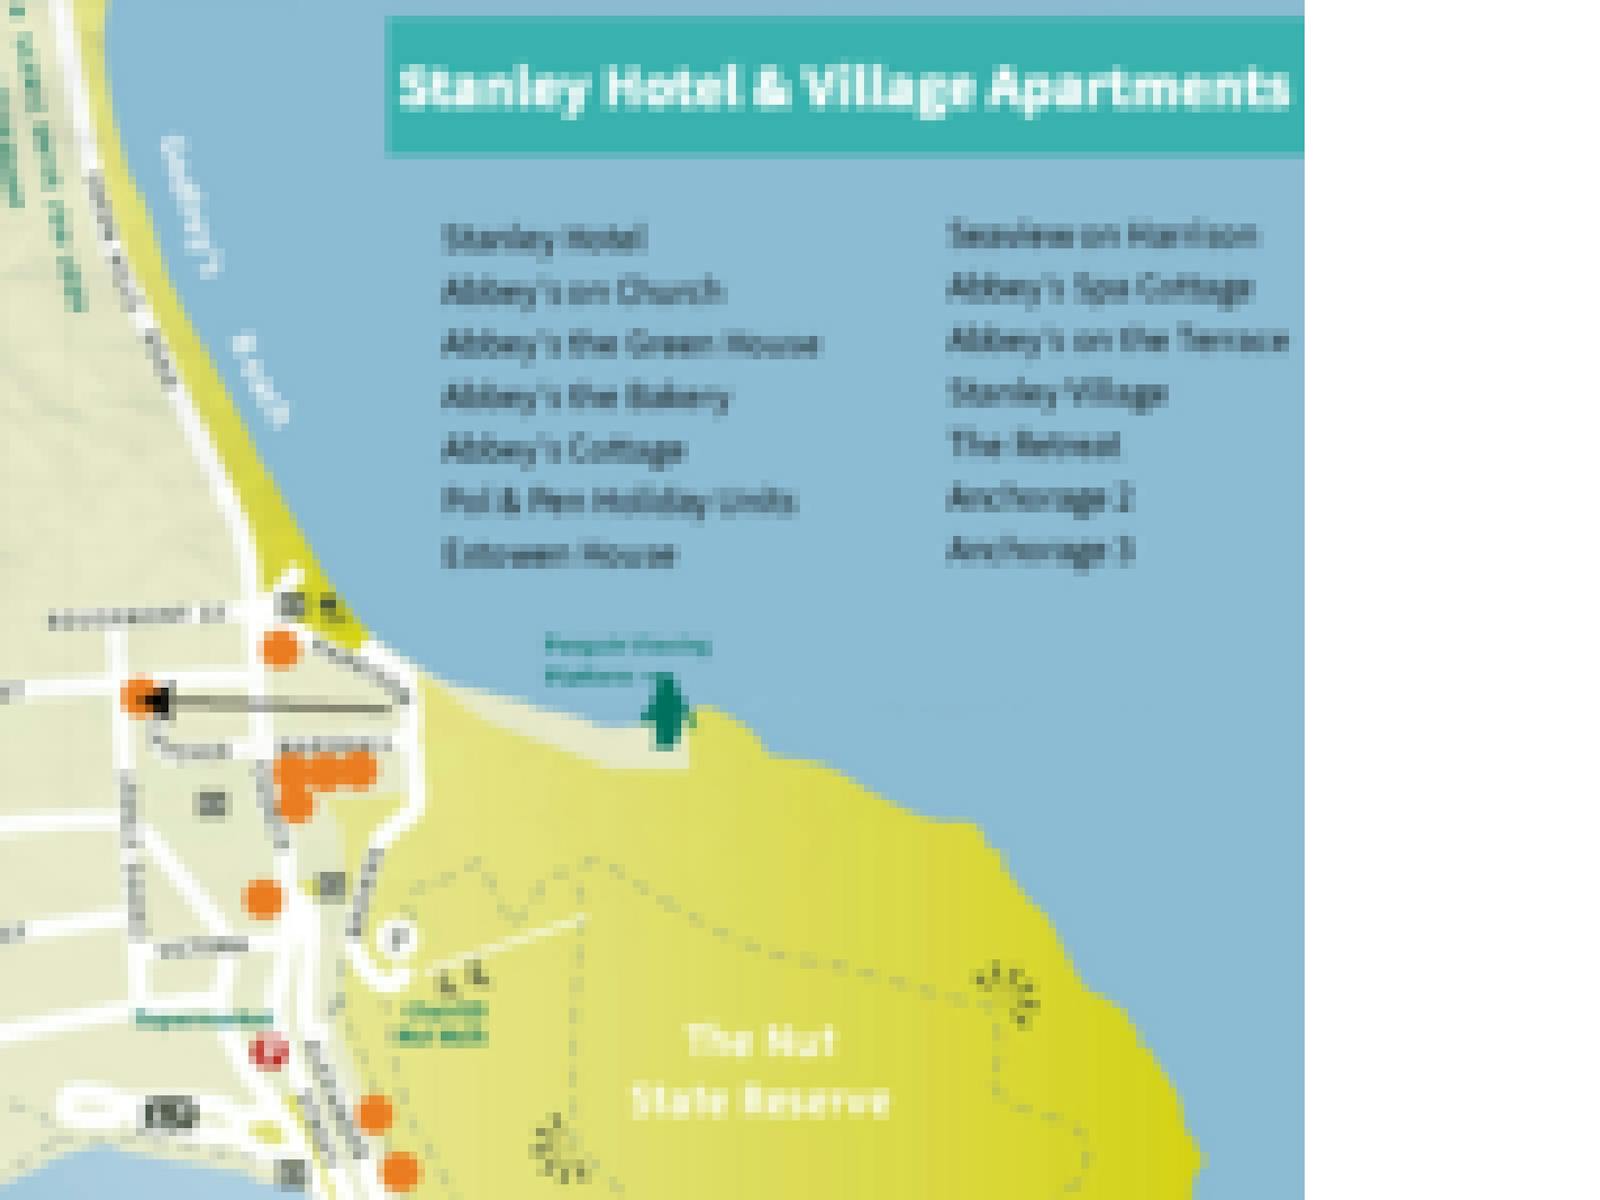 Stanley town map showing Pol & Pen location